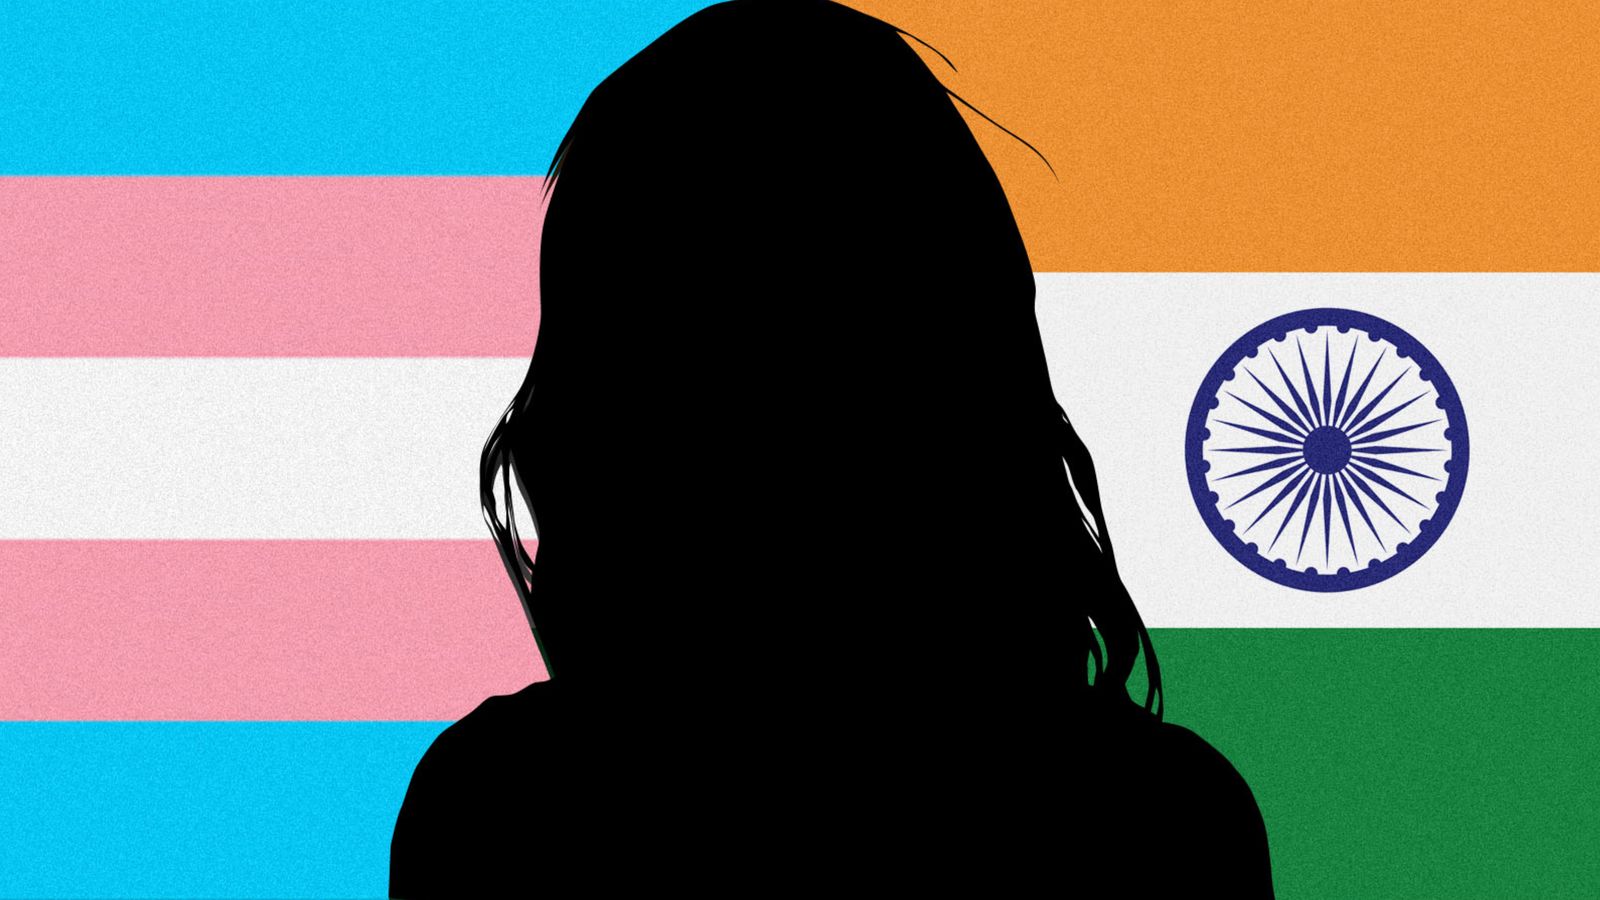 Xx Hindi Rape Video - India's rape laws don't cover transgender people. They say it's putting  them at risk | CNN